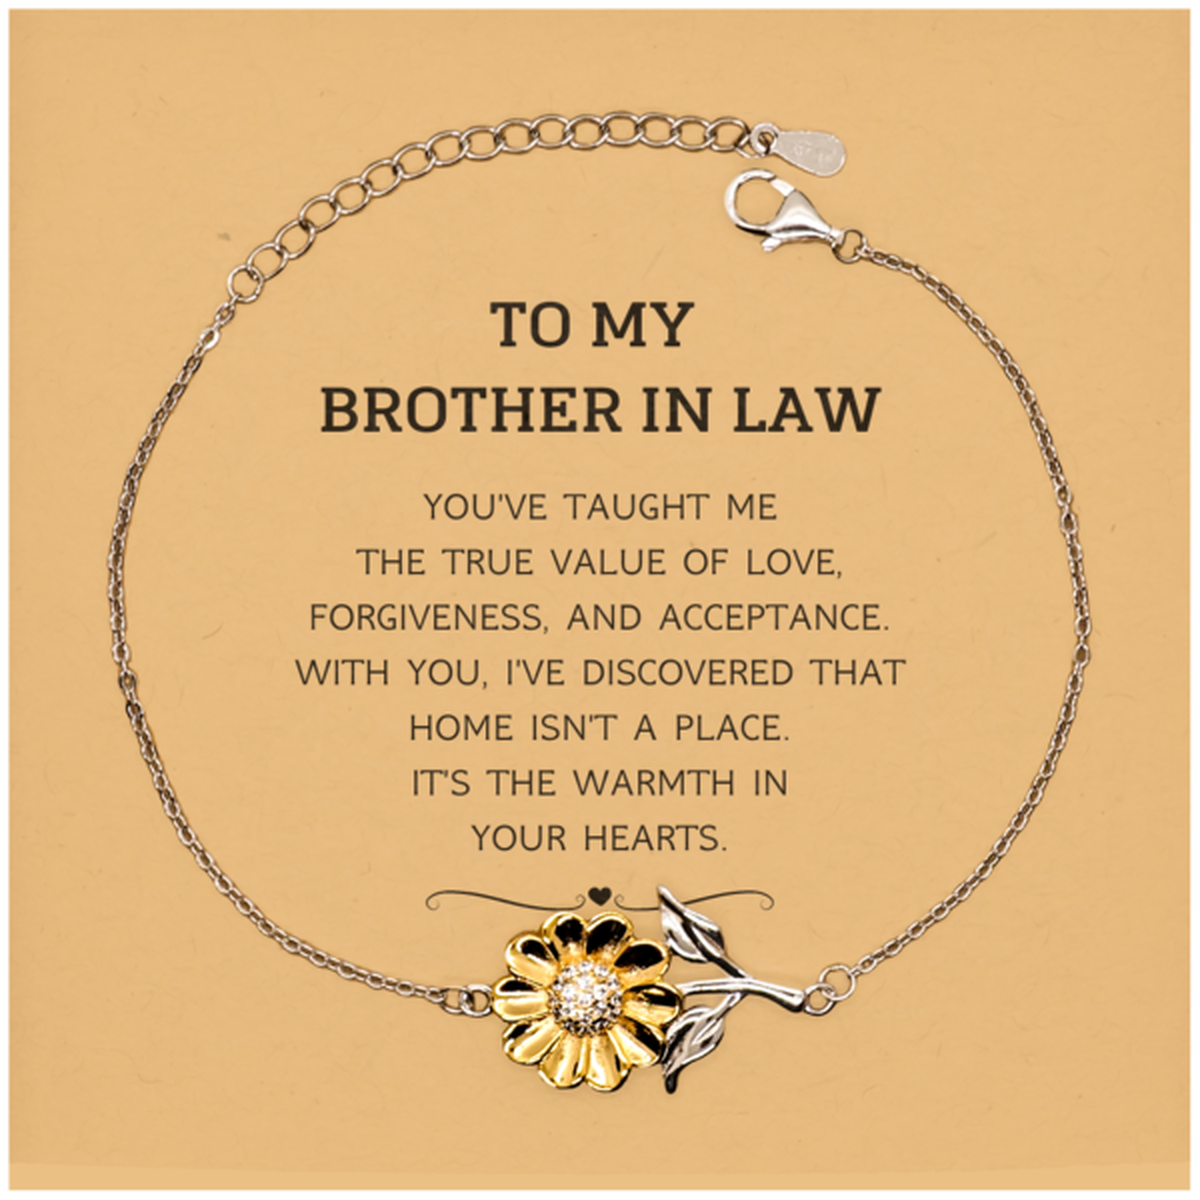 To My Brother In Law Gifts, You've taught me the true value of love, Thank You Gifts For Brother In Law, Birthday Christmas Sunflower Bracelet For Brother In Law